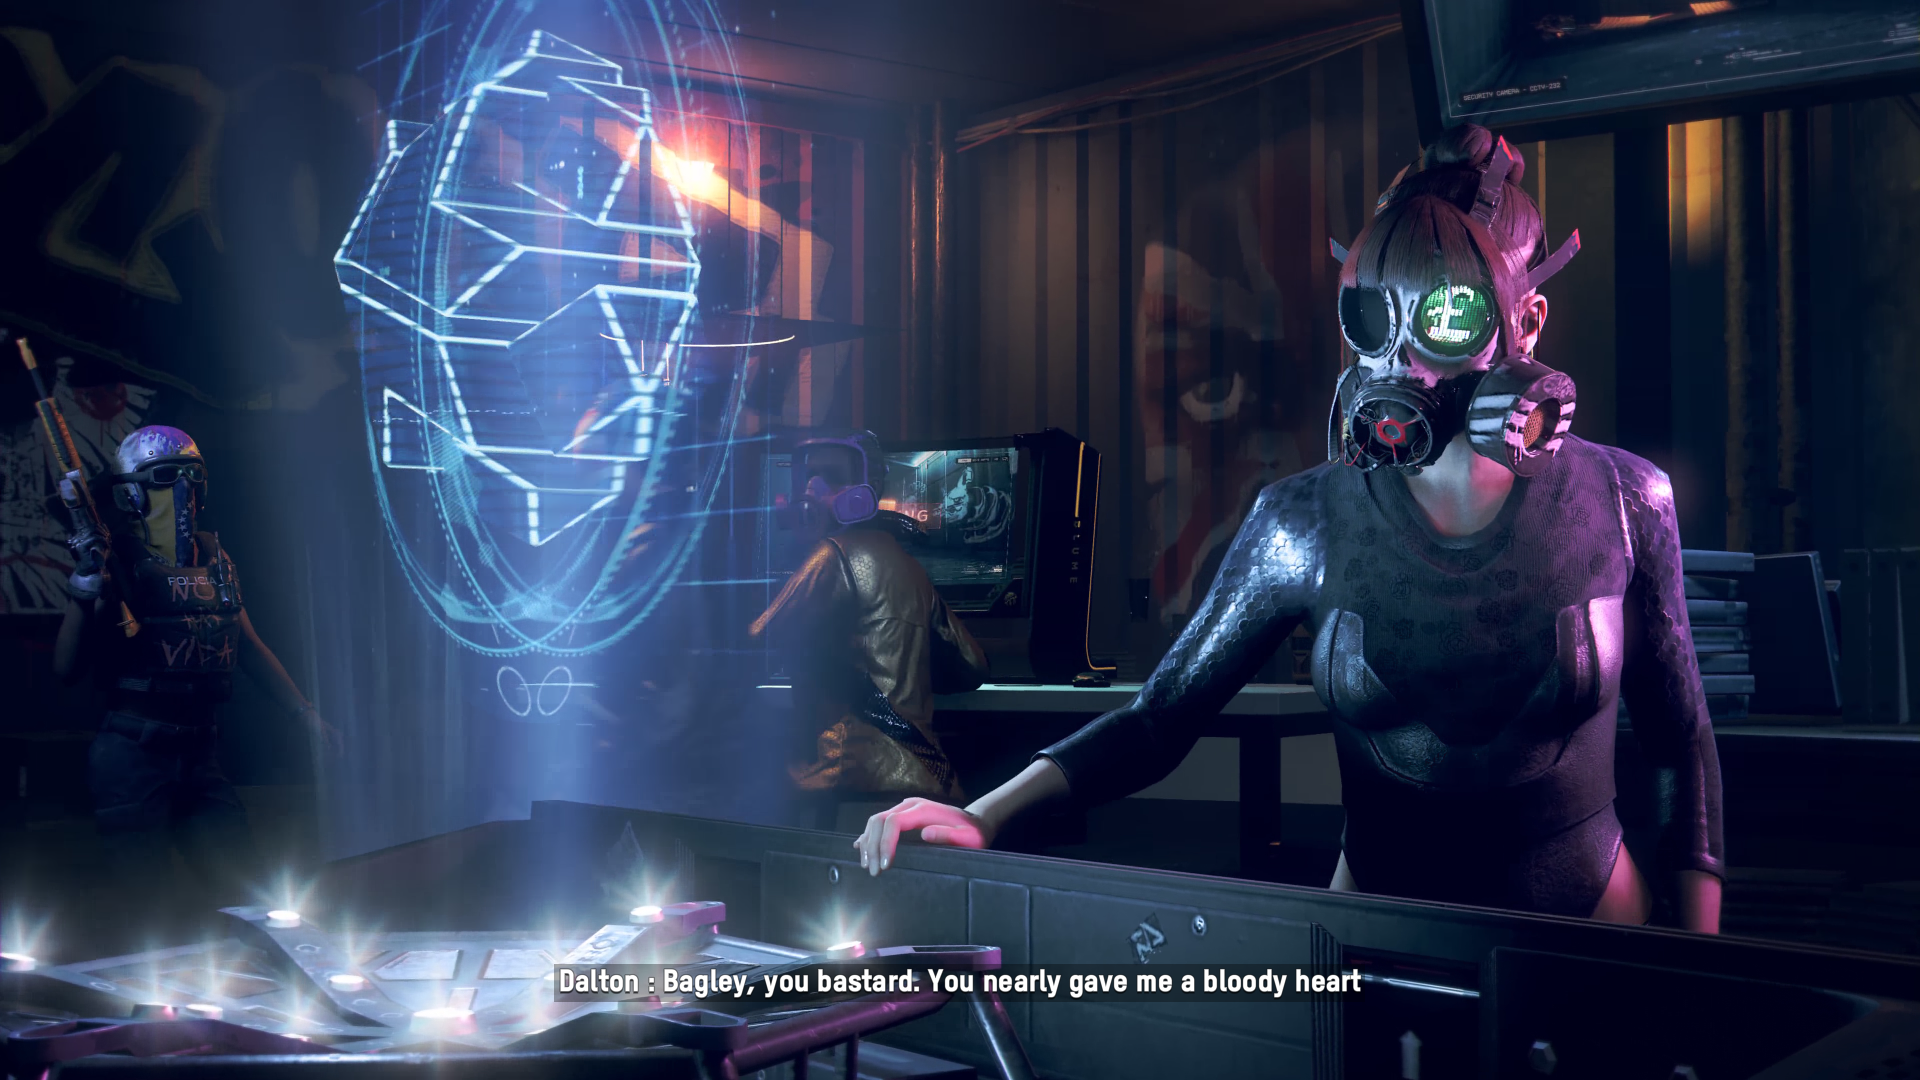 Watch Dogs: Legion – Online – Review